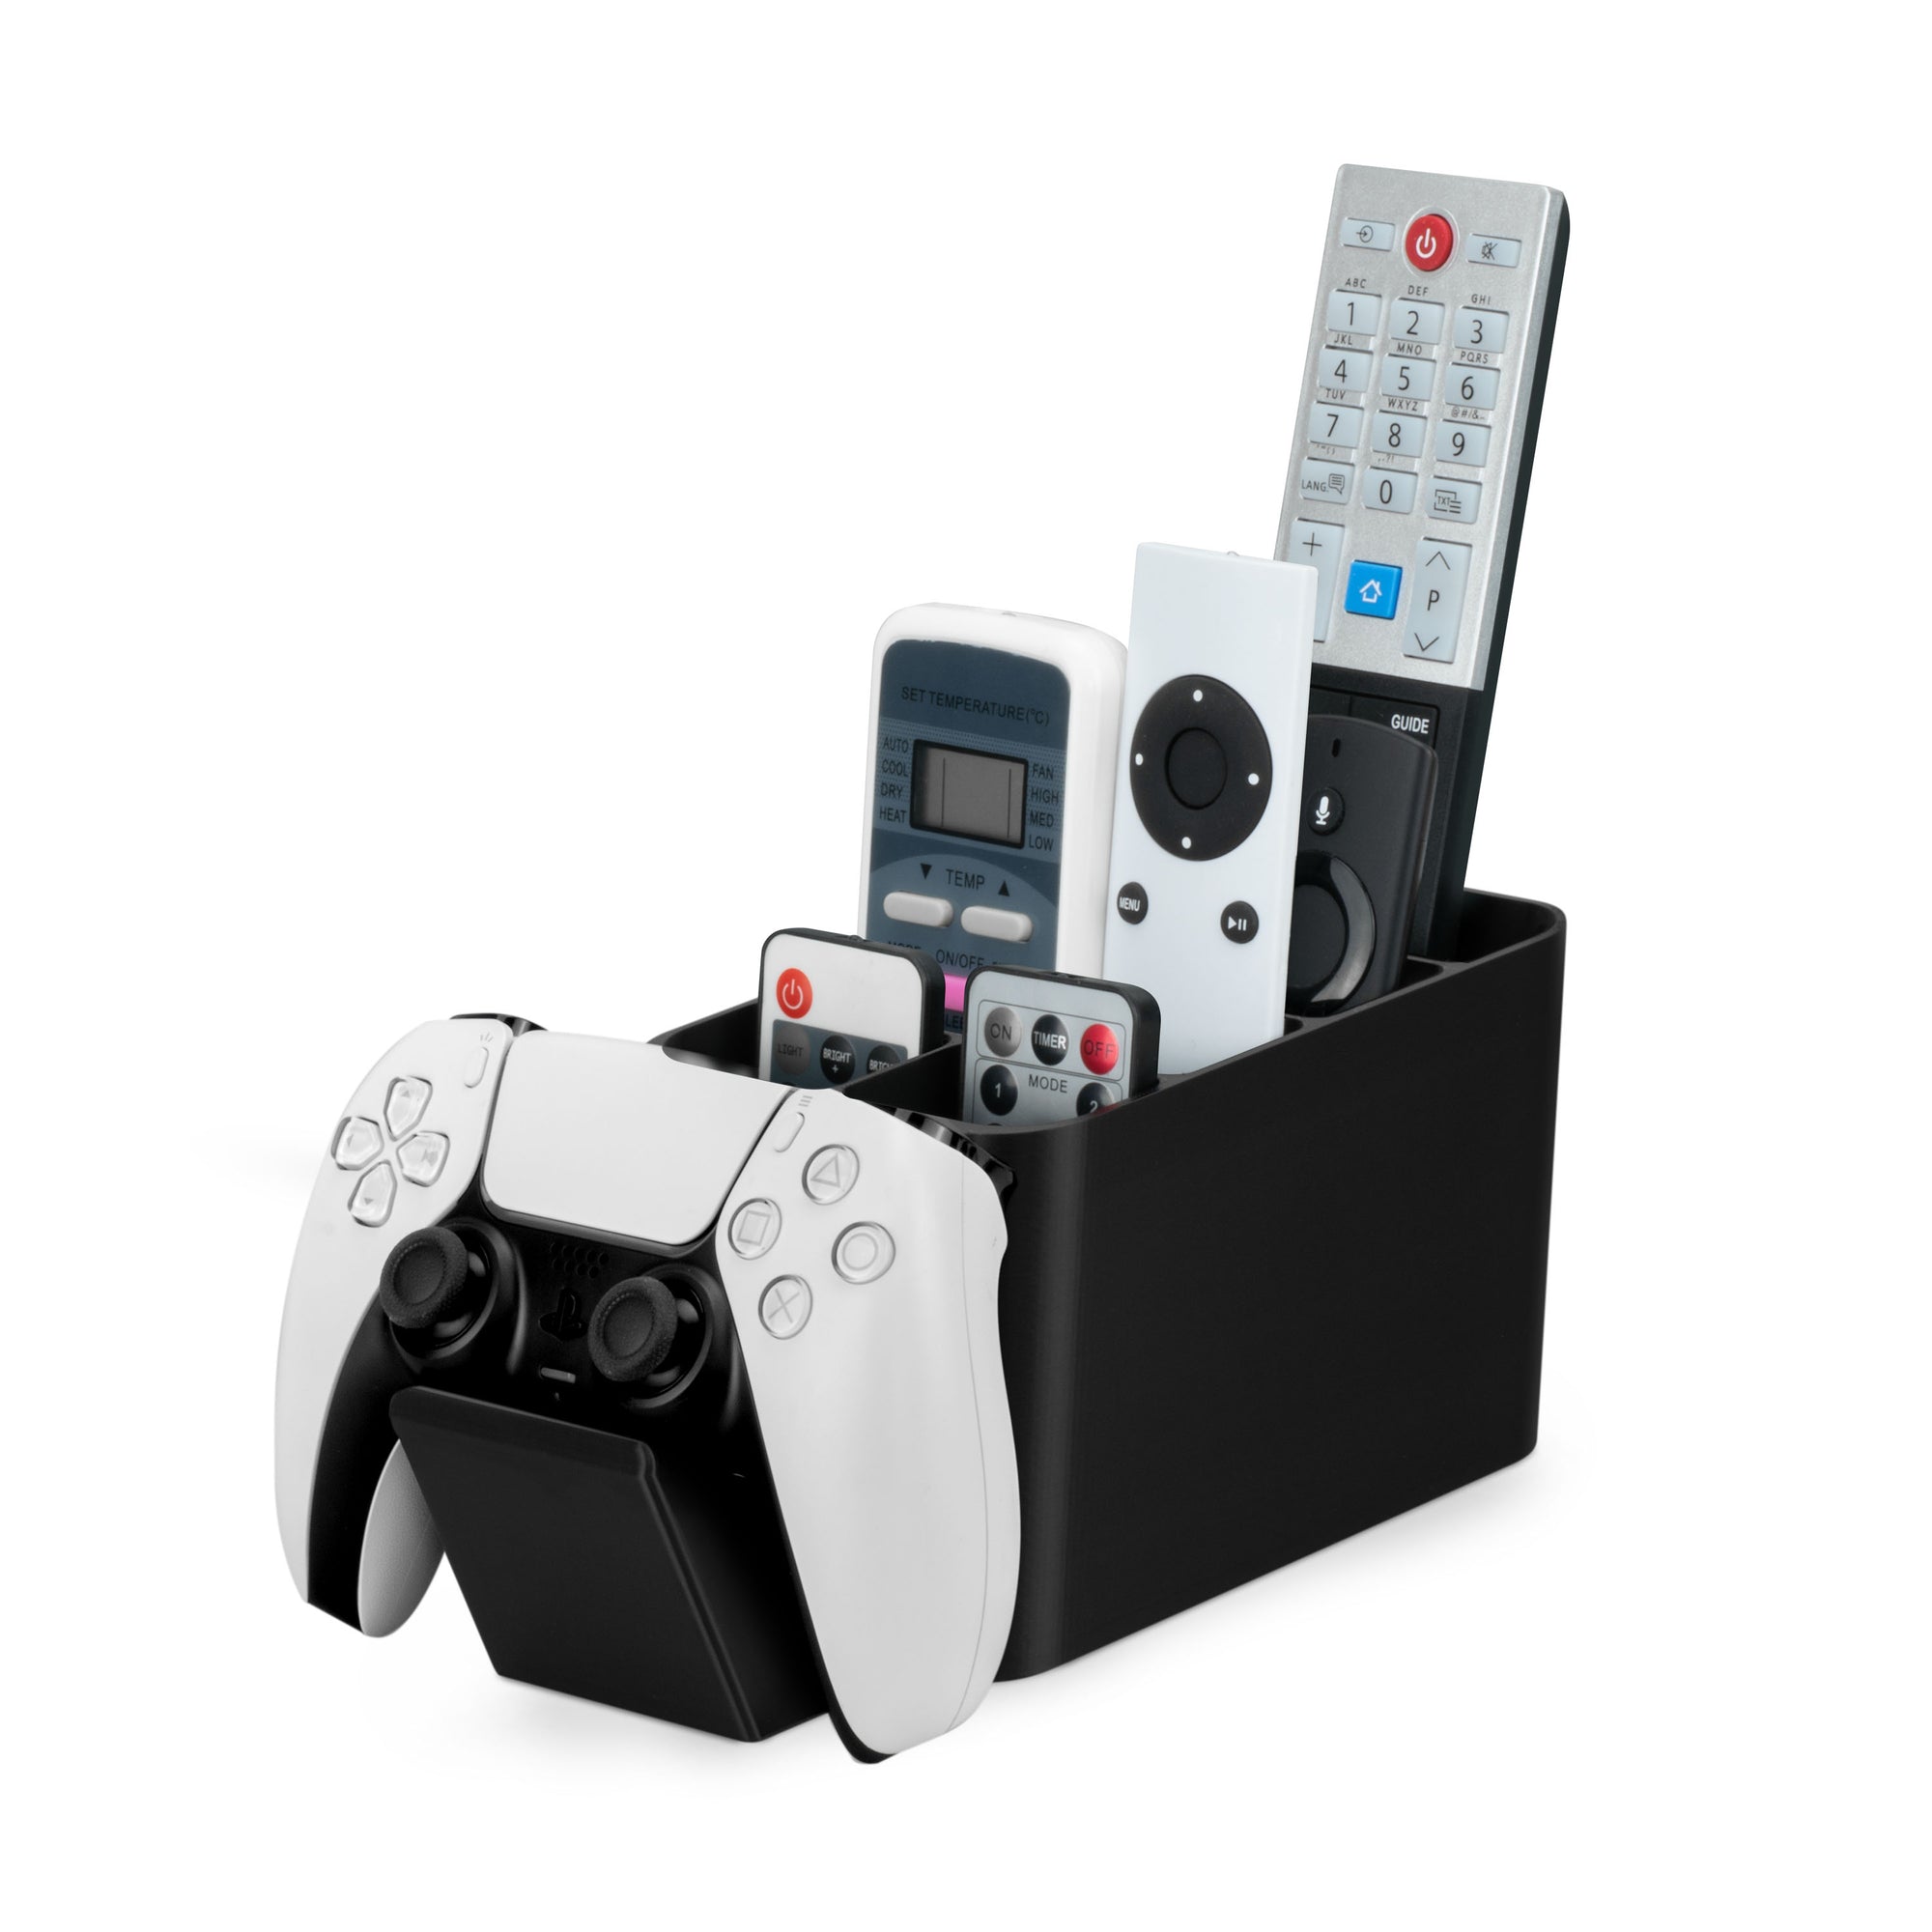 Game Controller & Remote Control Holder Organizer, Ideal for Side Tables & Desktops (For 3 to 4 Remotes, 1 Game Controller, Pens & Stationery)